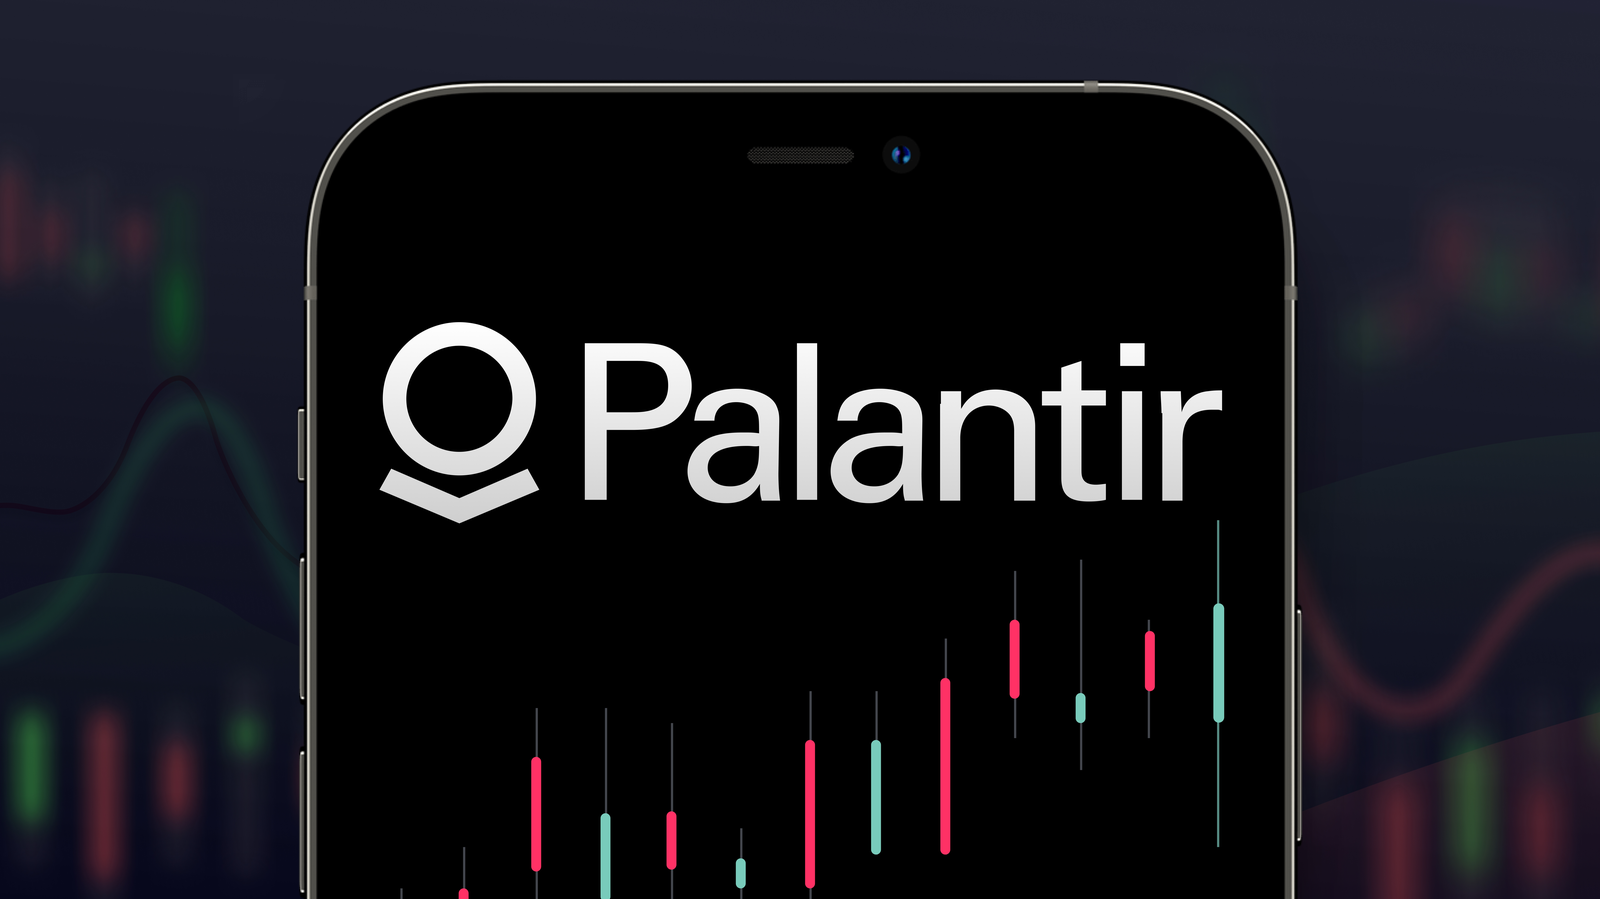 Palantir (PLTR) logo in a smartphone with a series of stock charts on the background.